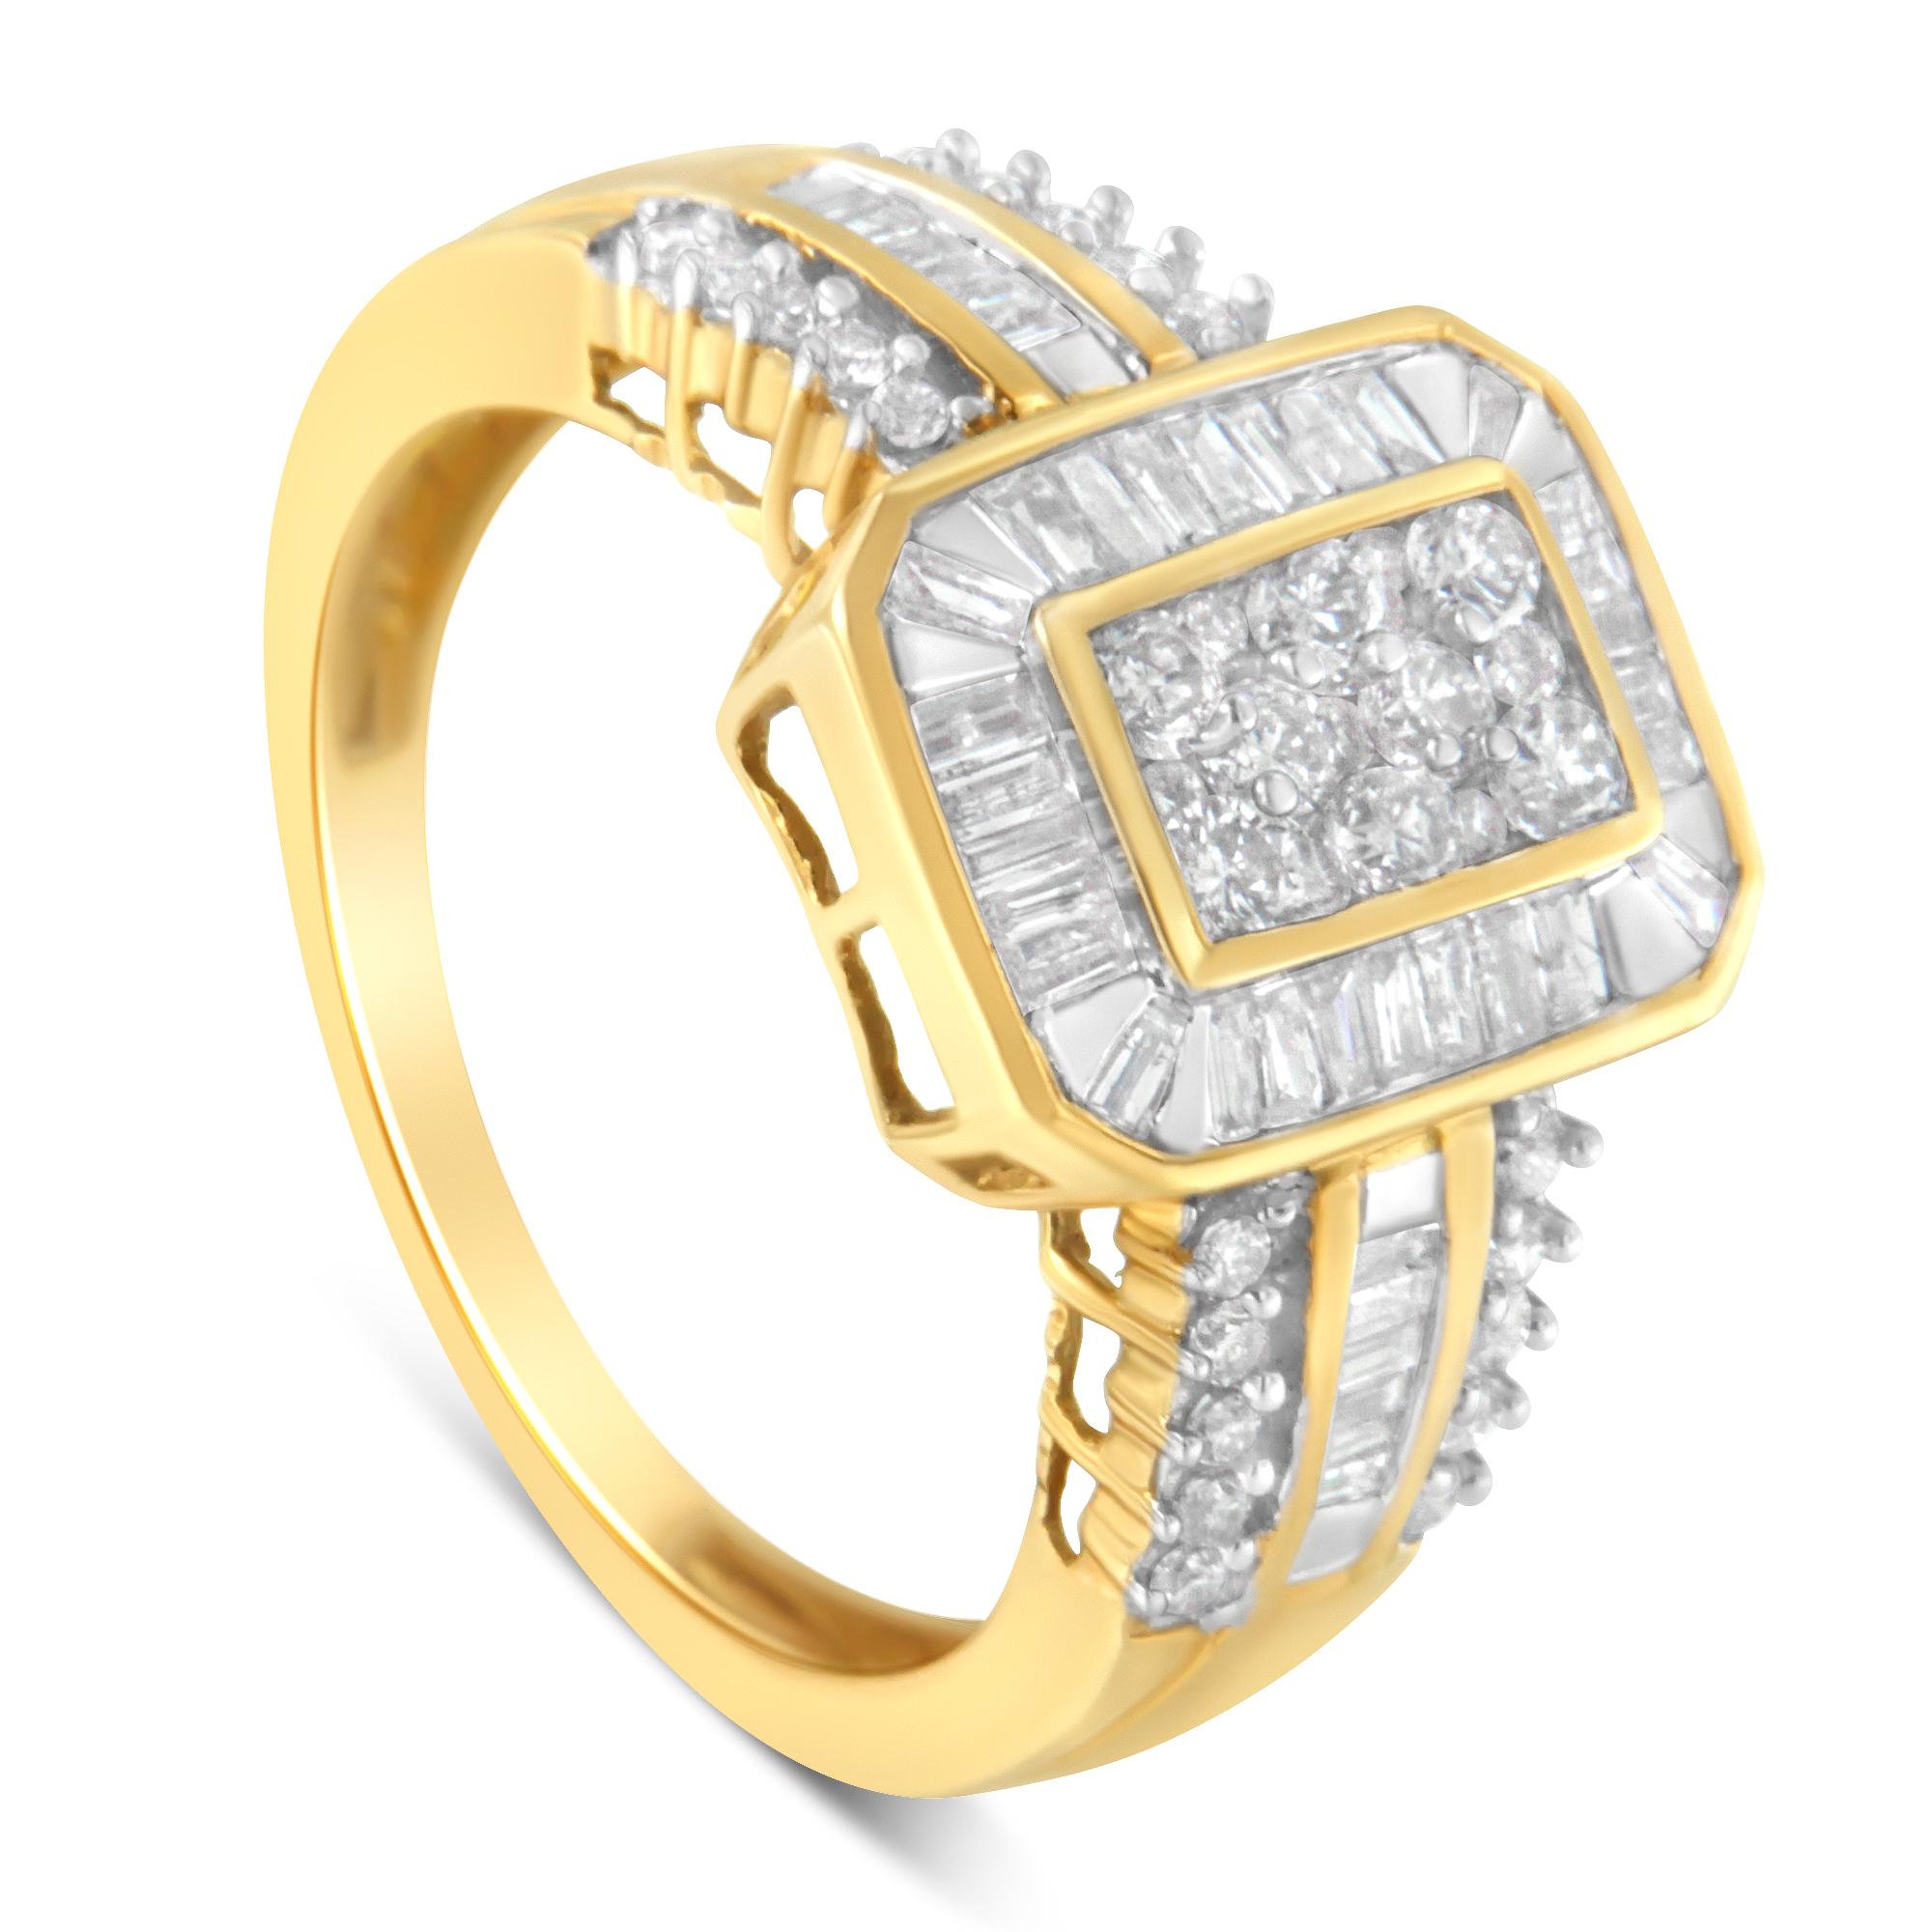 For Sale:  10K Yellow Gold 1.0 Carat Diamond Cocktail Ring 5